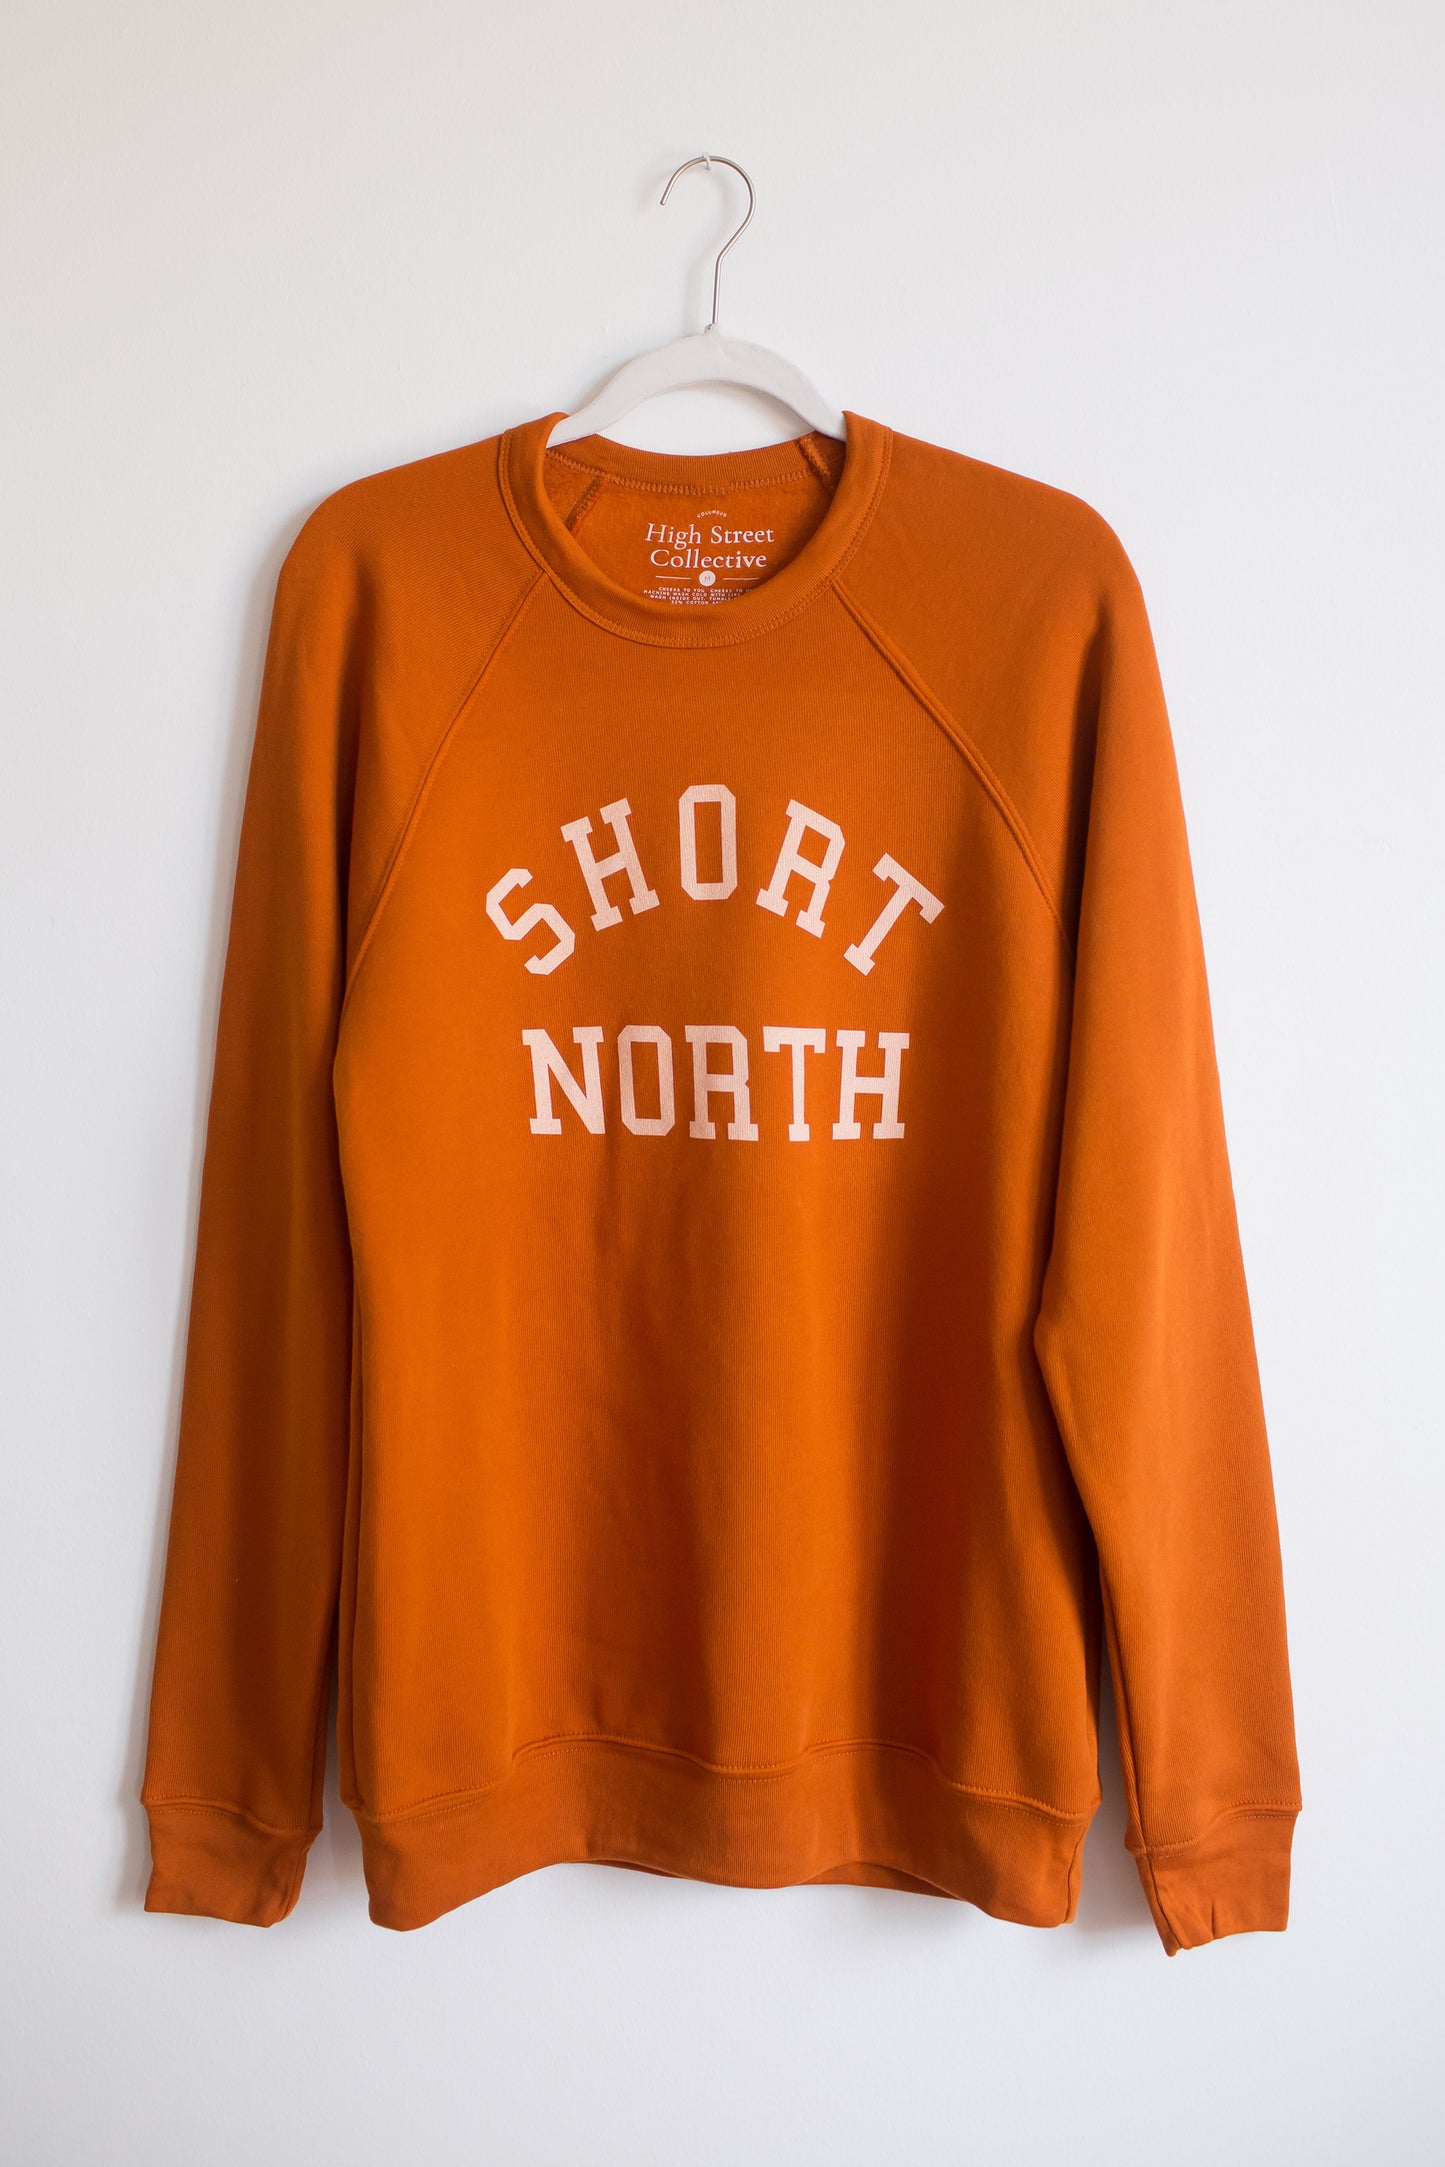 Rust colored slim fit, crewneck sweatshirt with Short North graphic at front. This style has raglan sleeves for a vintage look.